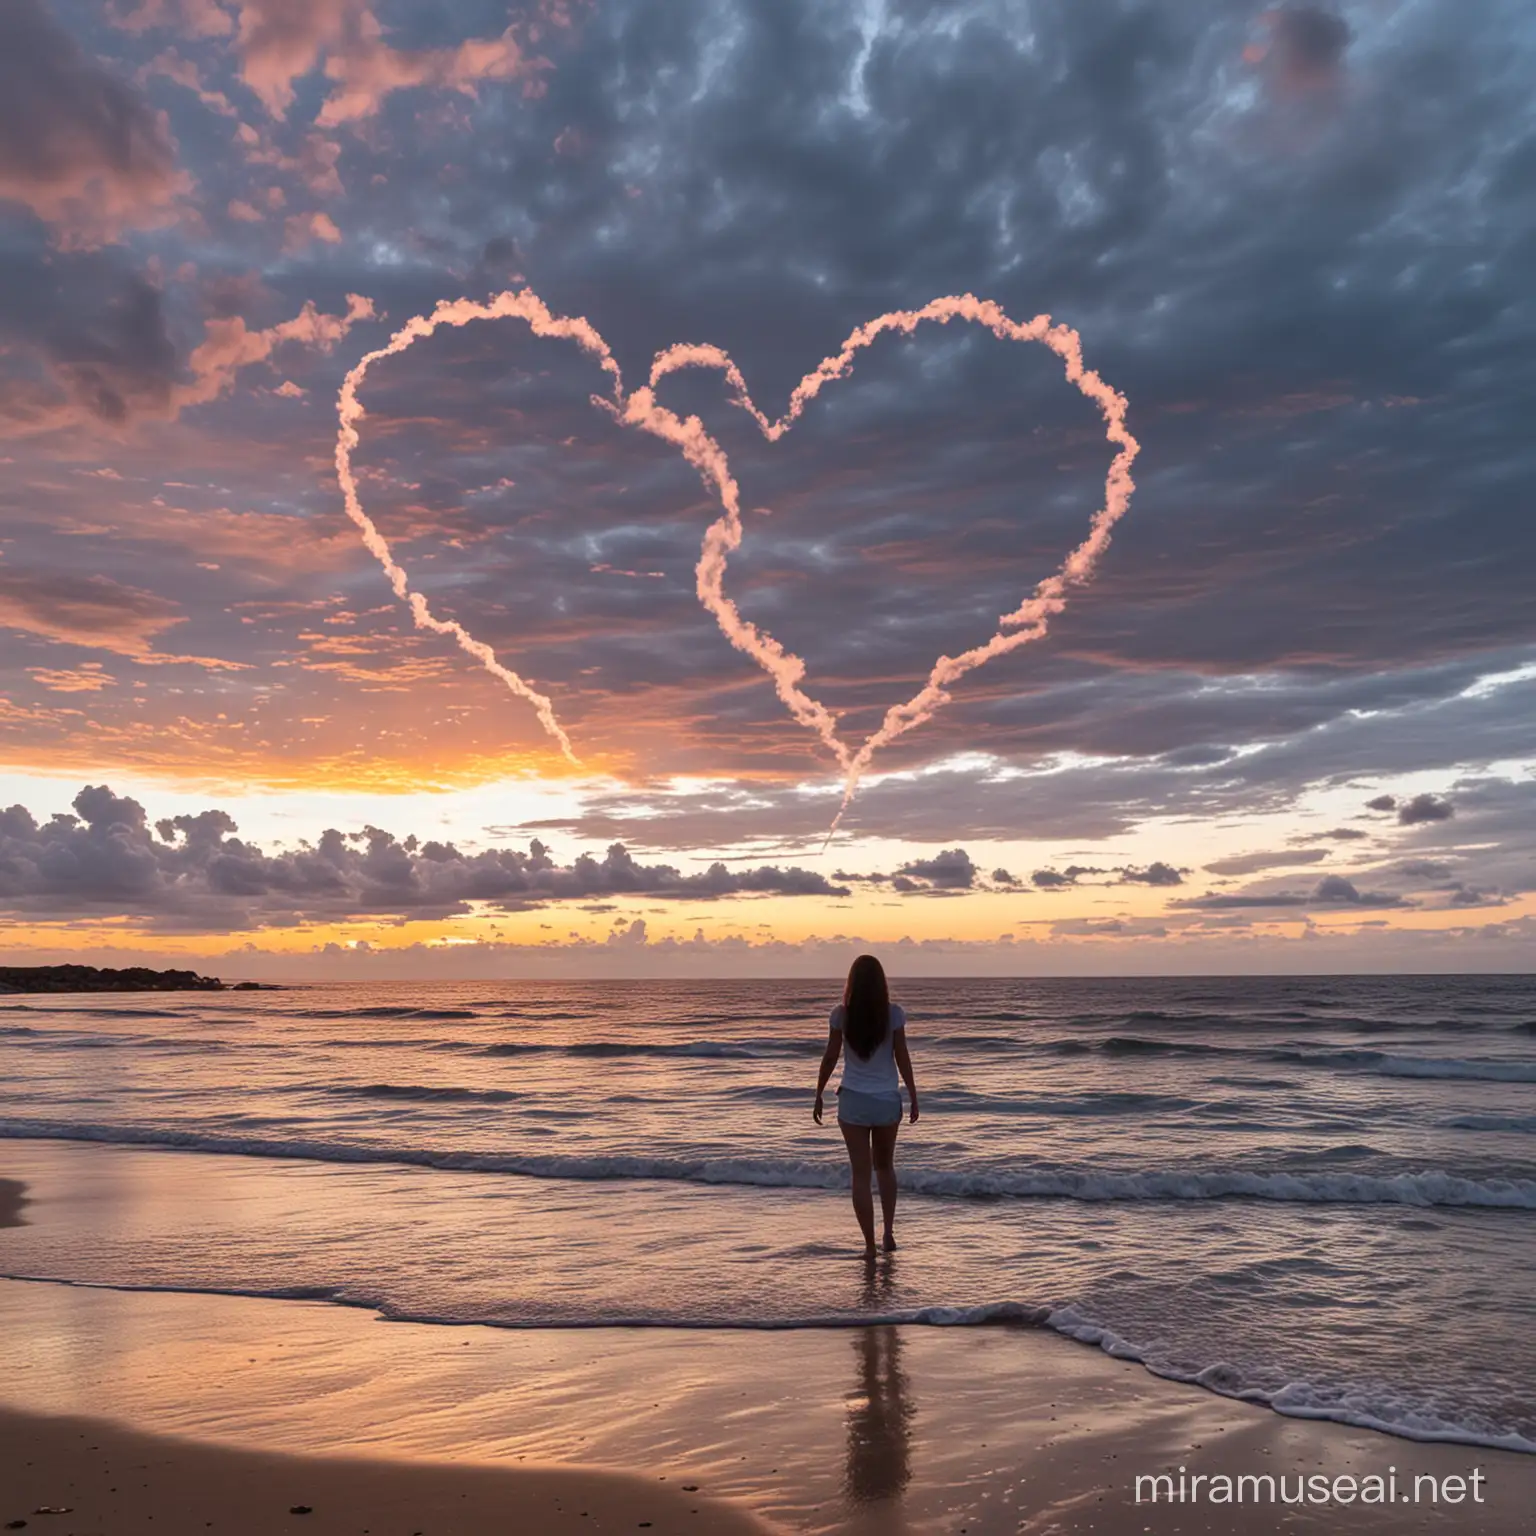 girl in the distance on a beach at sunset with heart shaped clouds 